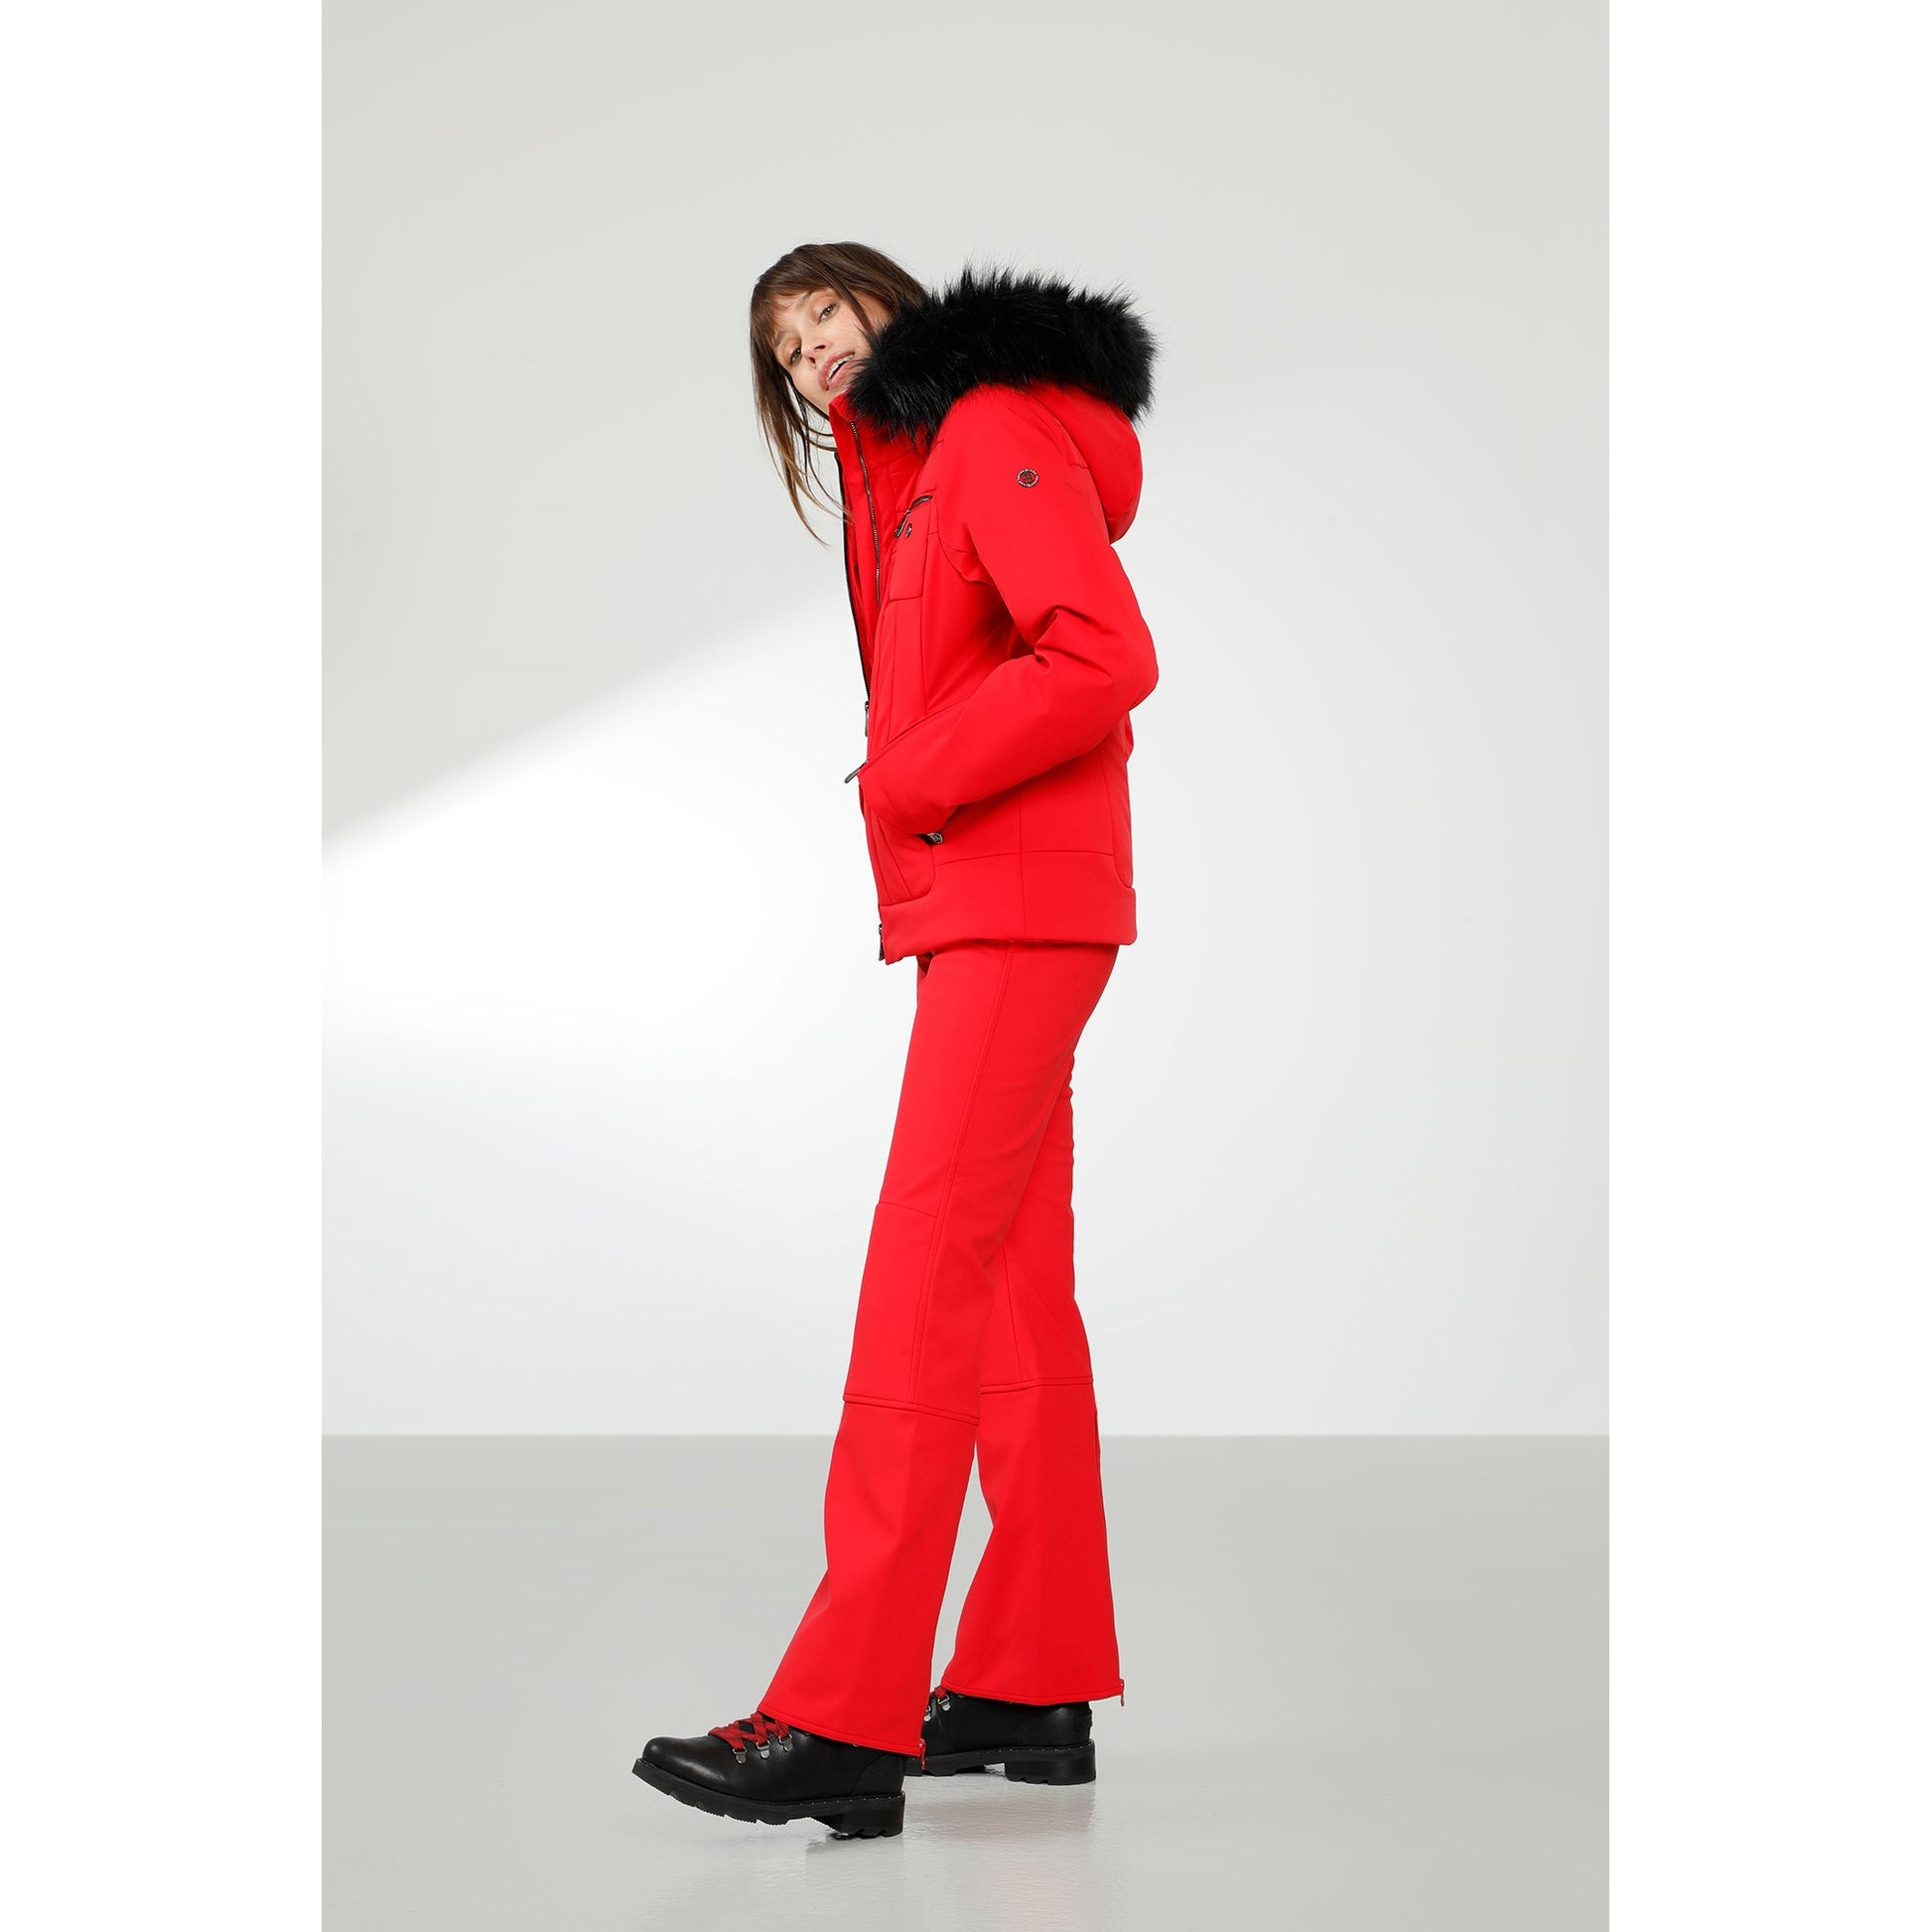 Poivre Blanc Womens Stretch Fitted Ski Pants in Scarlet Red